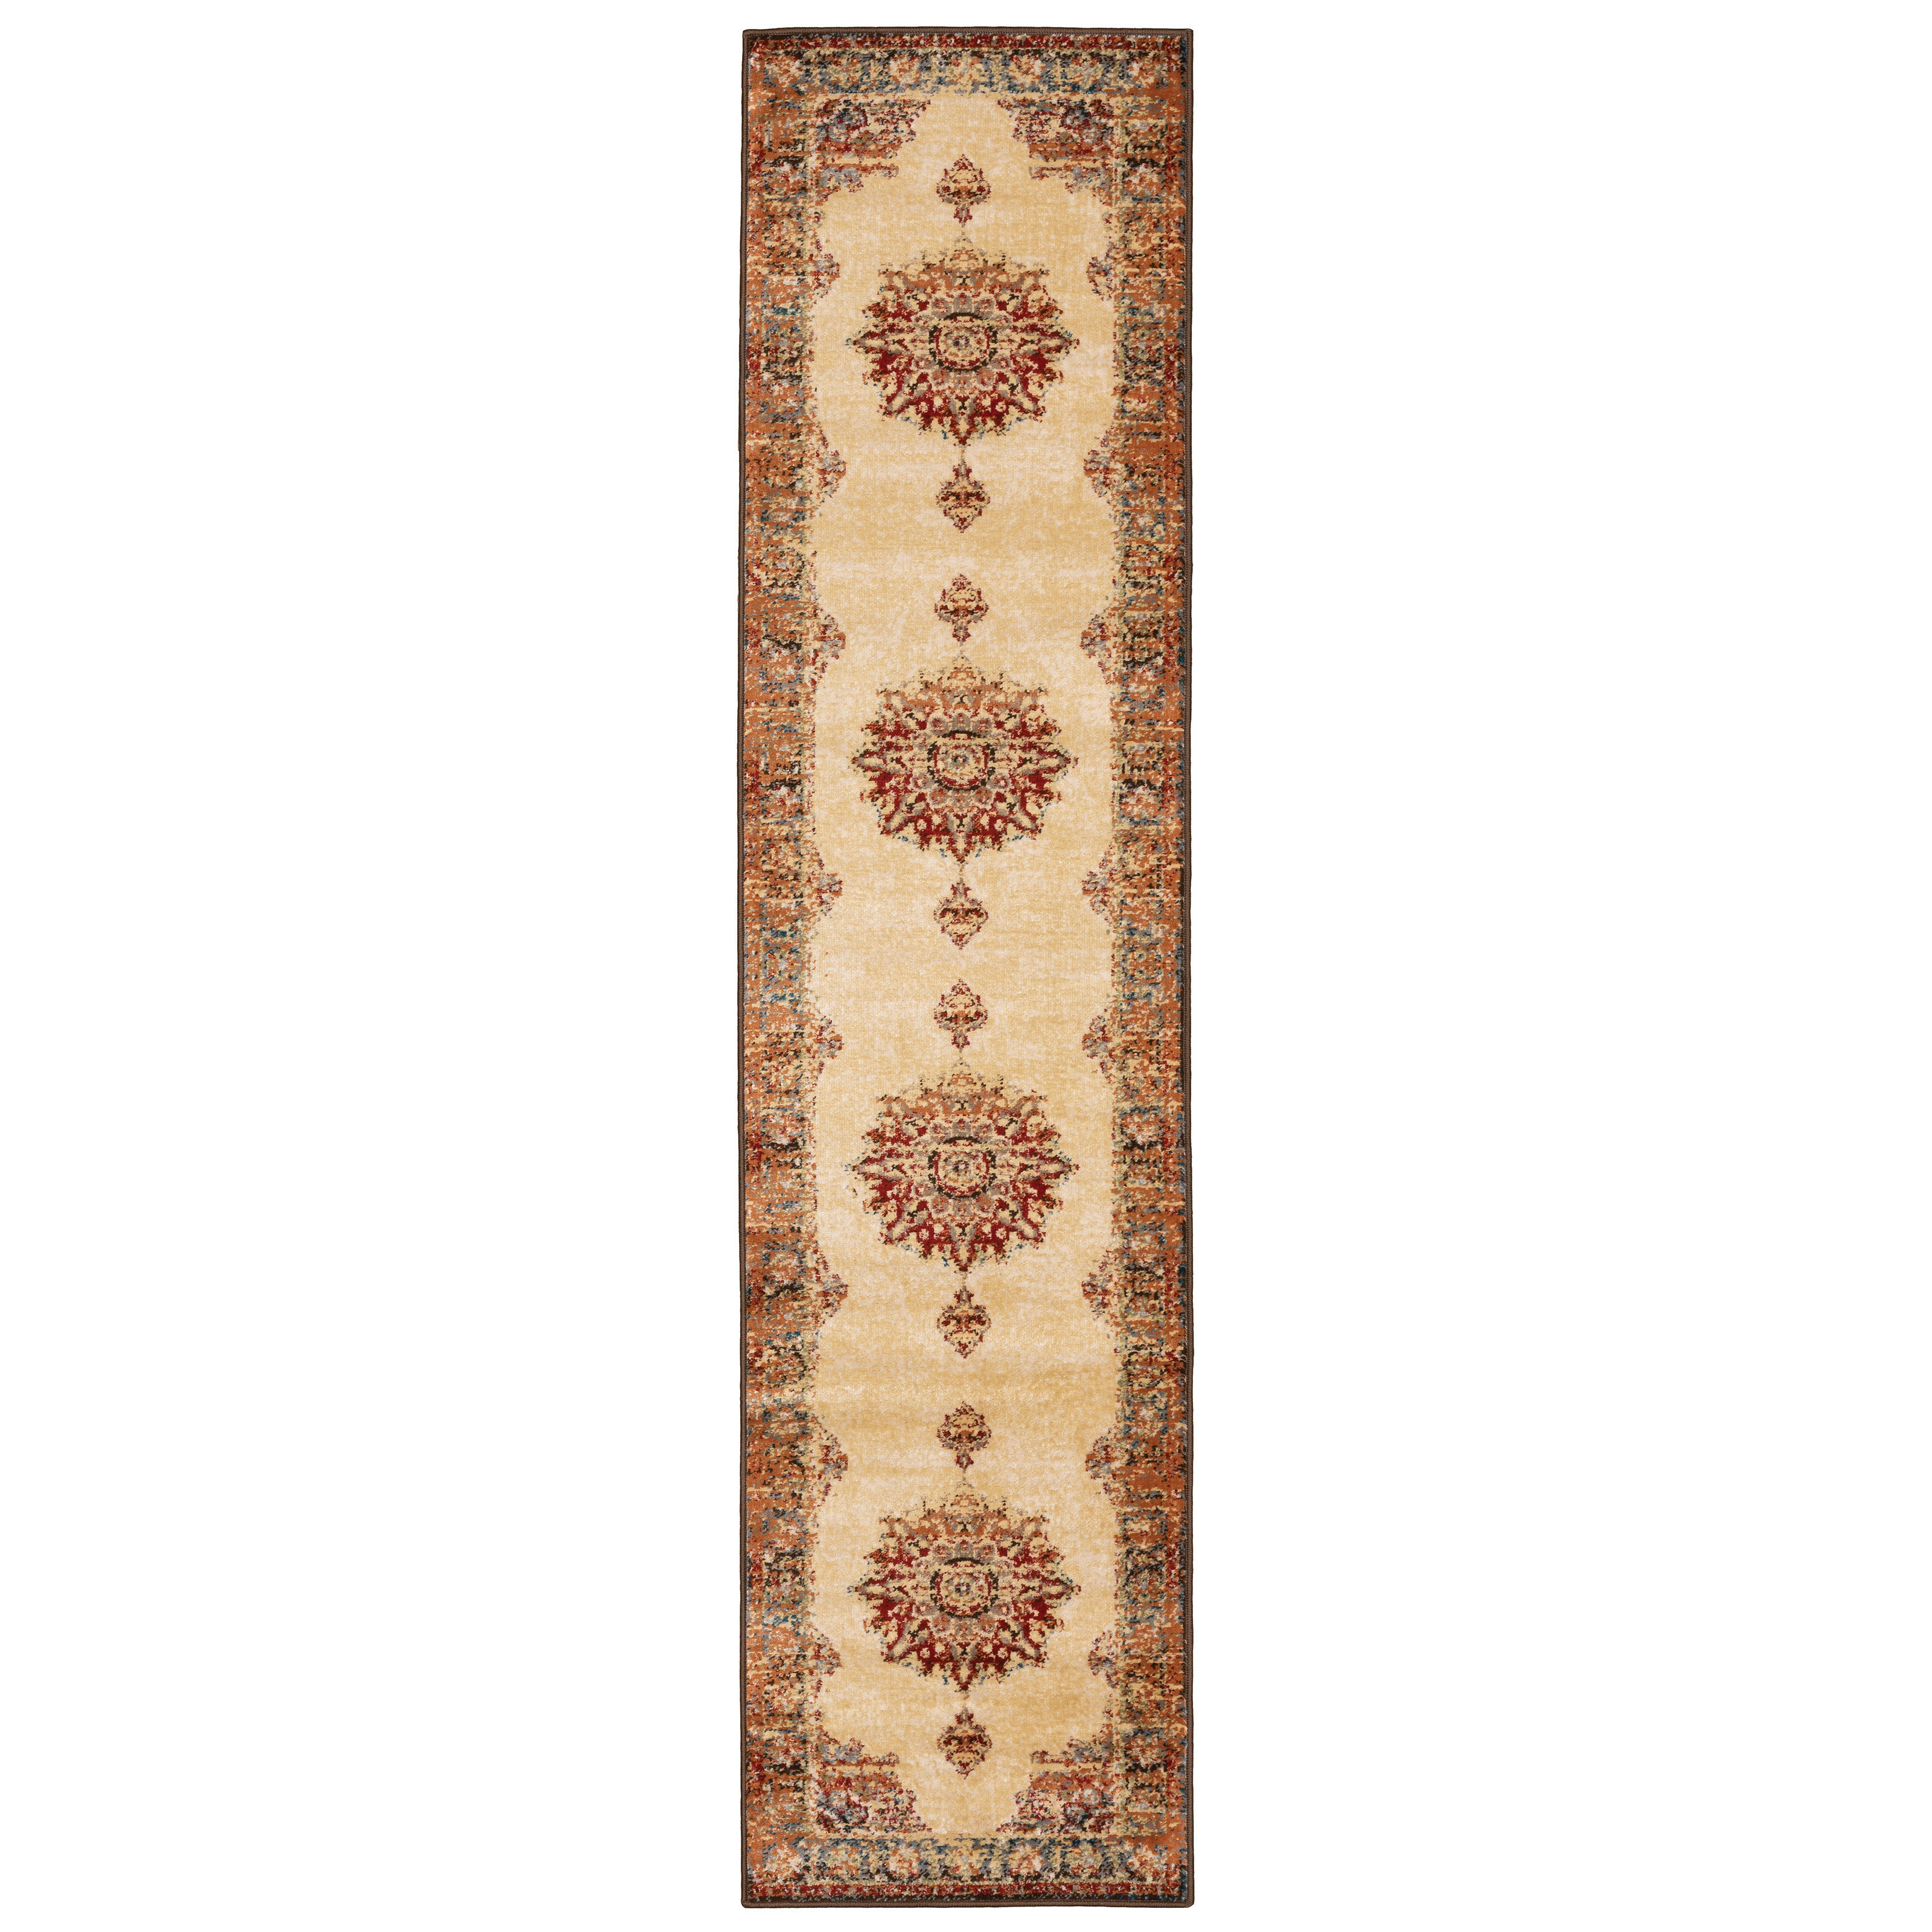 Safavieh Valencia Val 111 Rugs Rugs Direct Blue Area Rugs Polyester Rugs Area Rugs